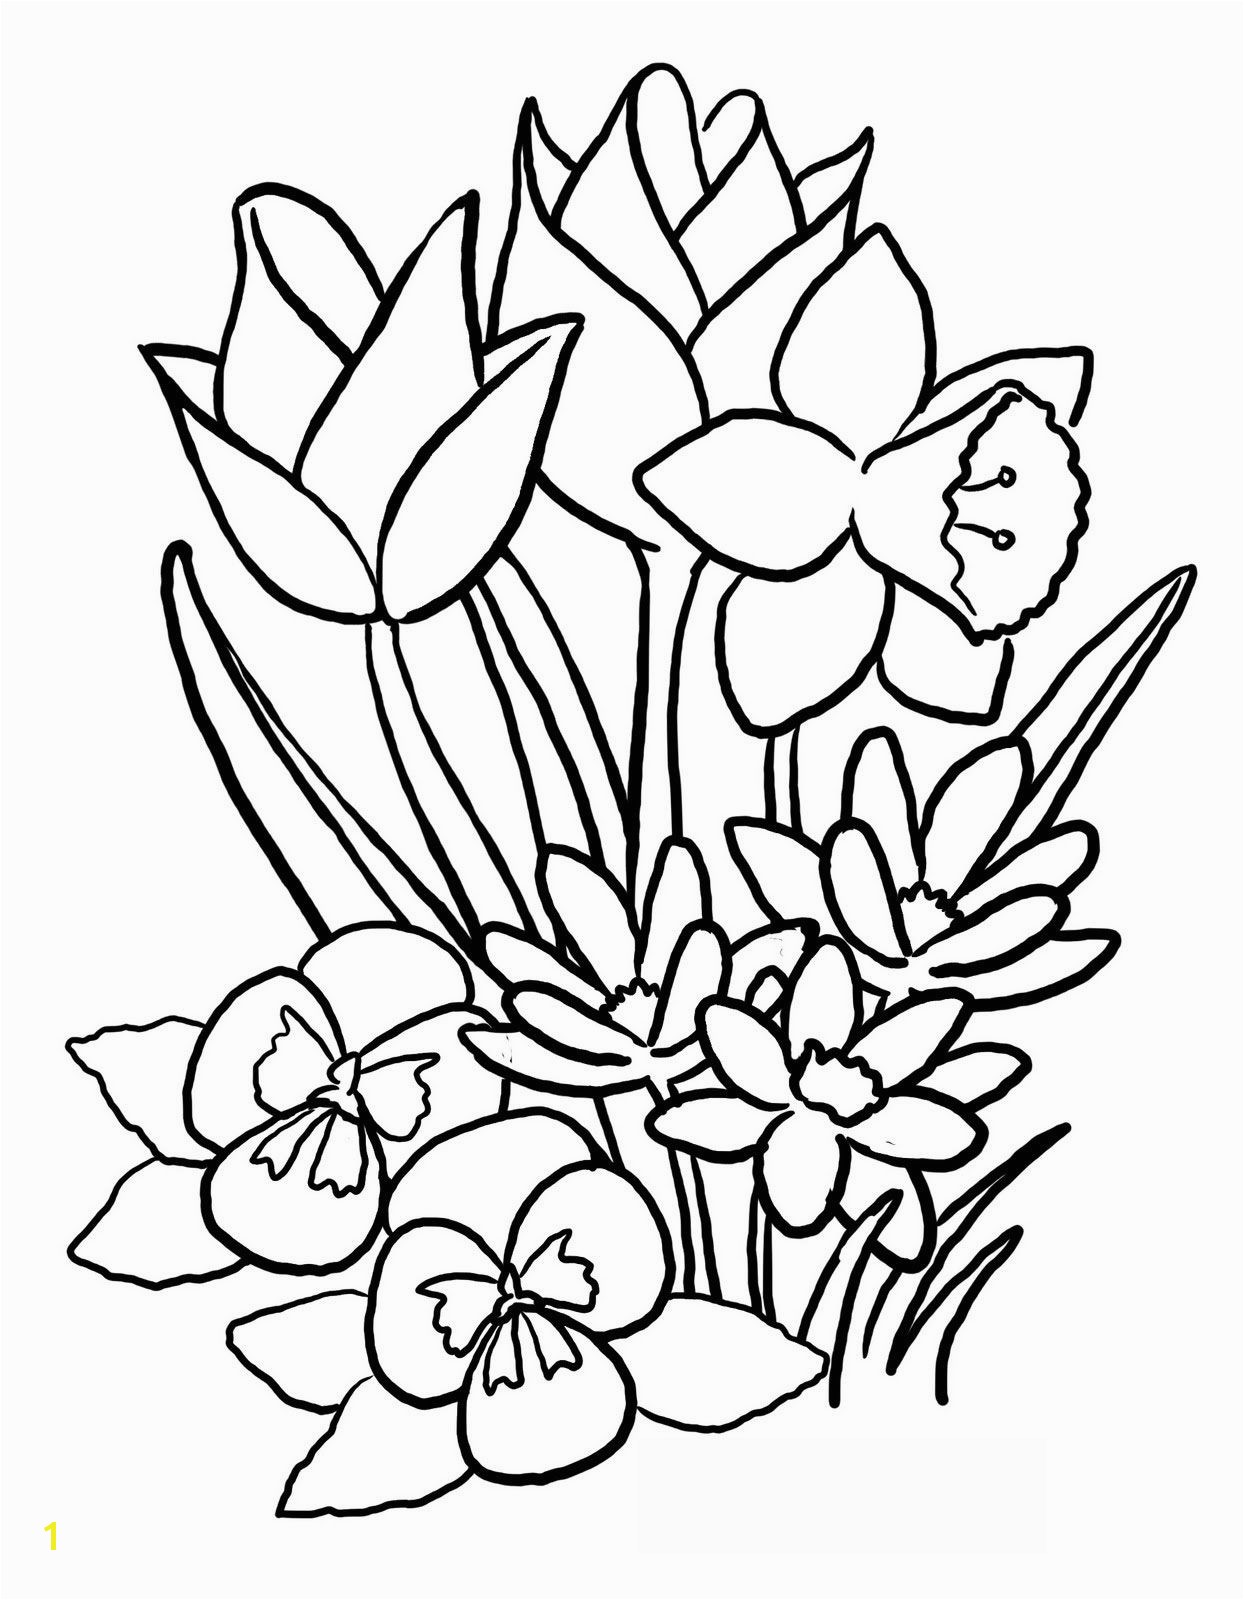 Flowers Coloring pages Printable Flower Coloring Pages These printable flower coloring pages are free Coloring pictures and sheets of f